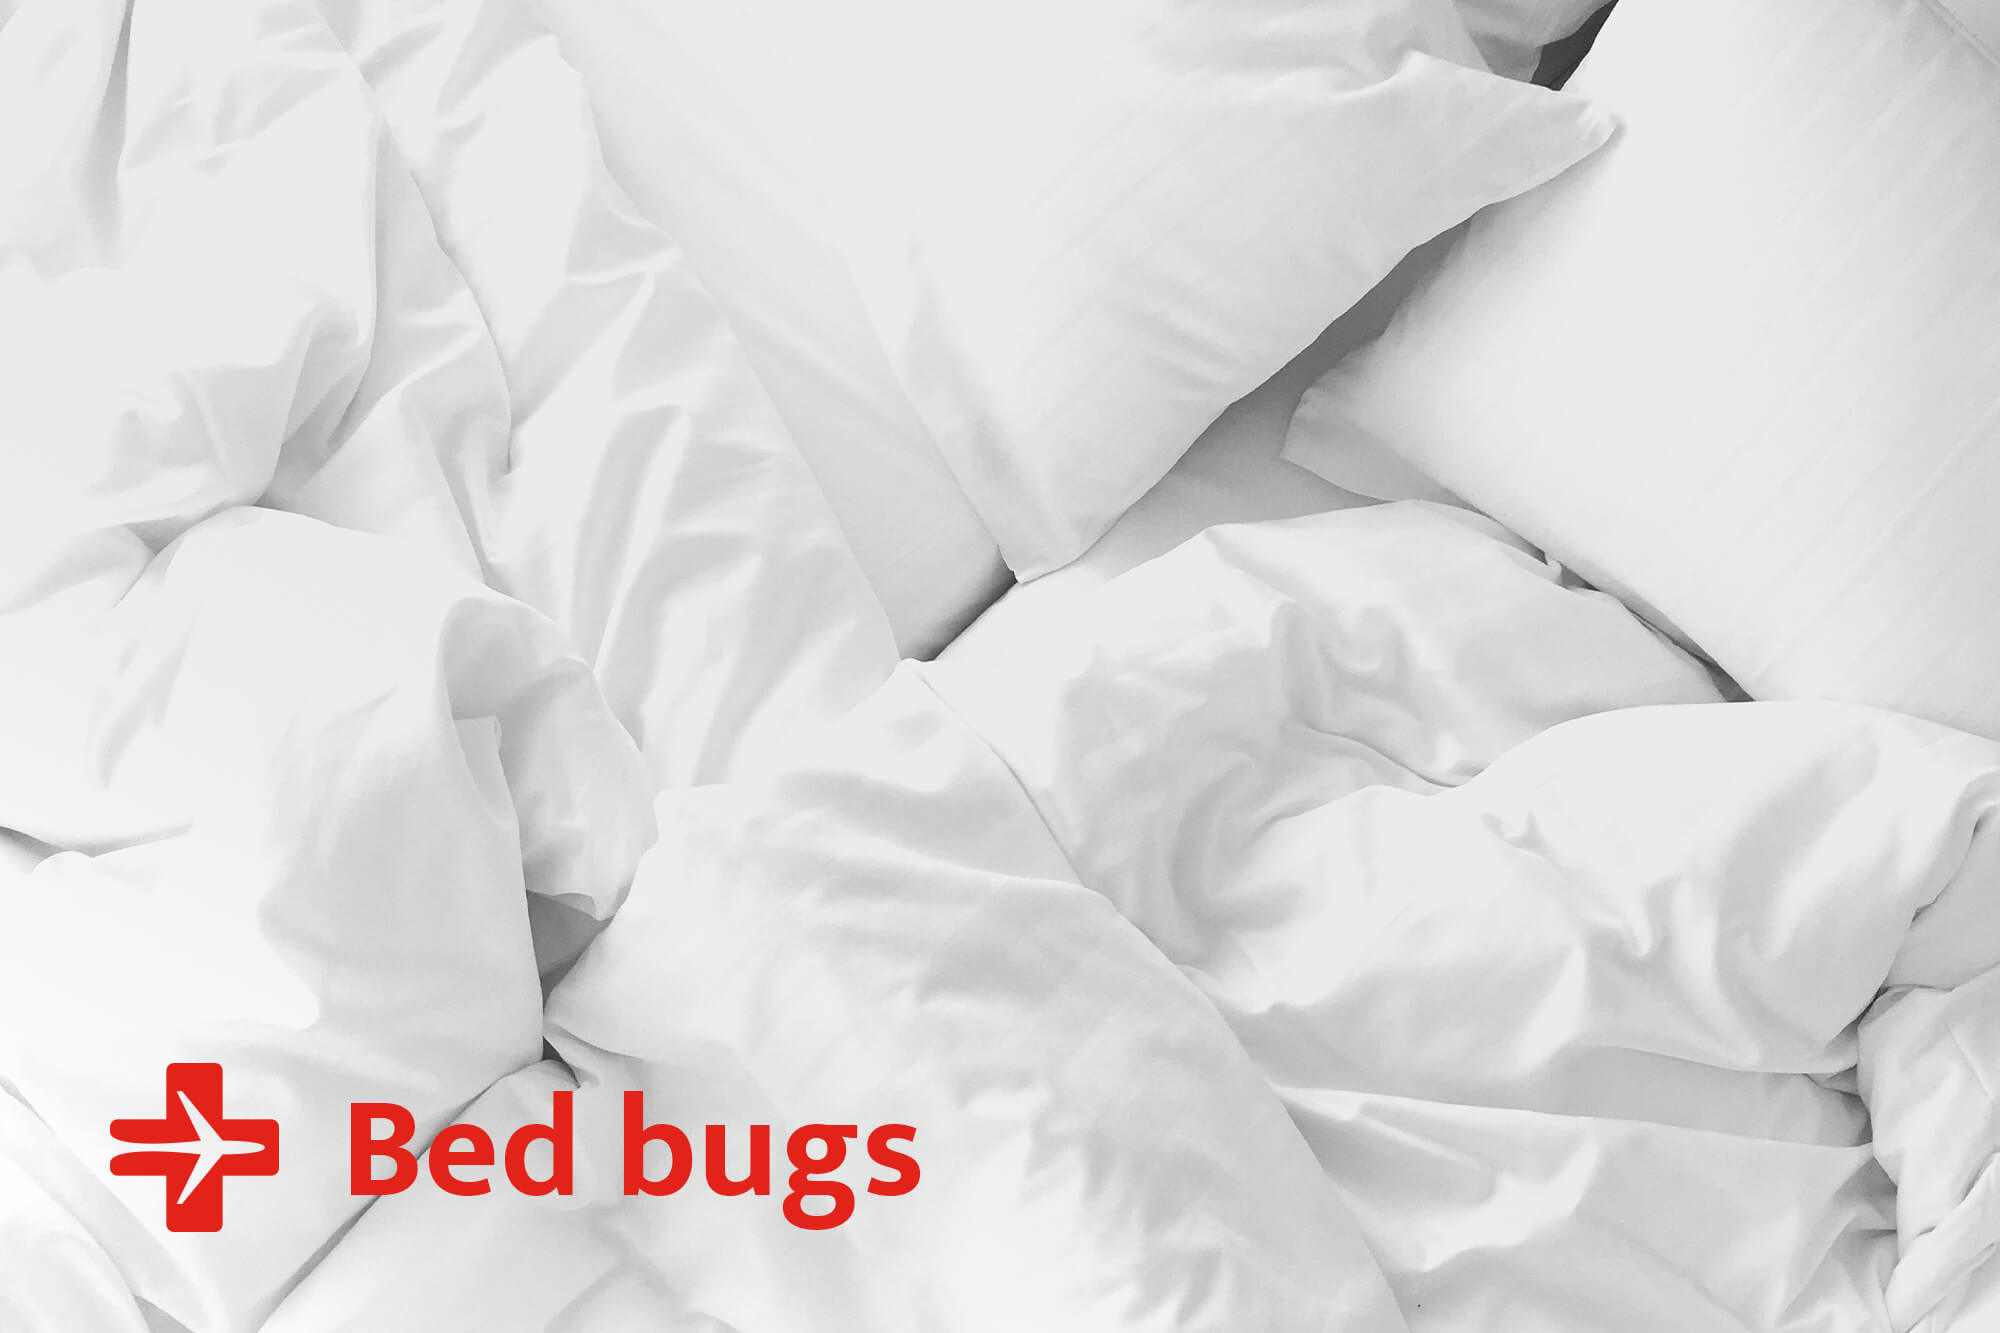 bed bugs, travel clinic vancouver, travel advice, travel allergies